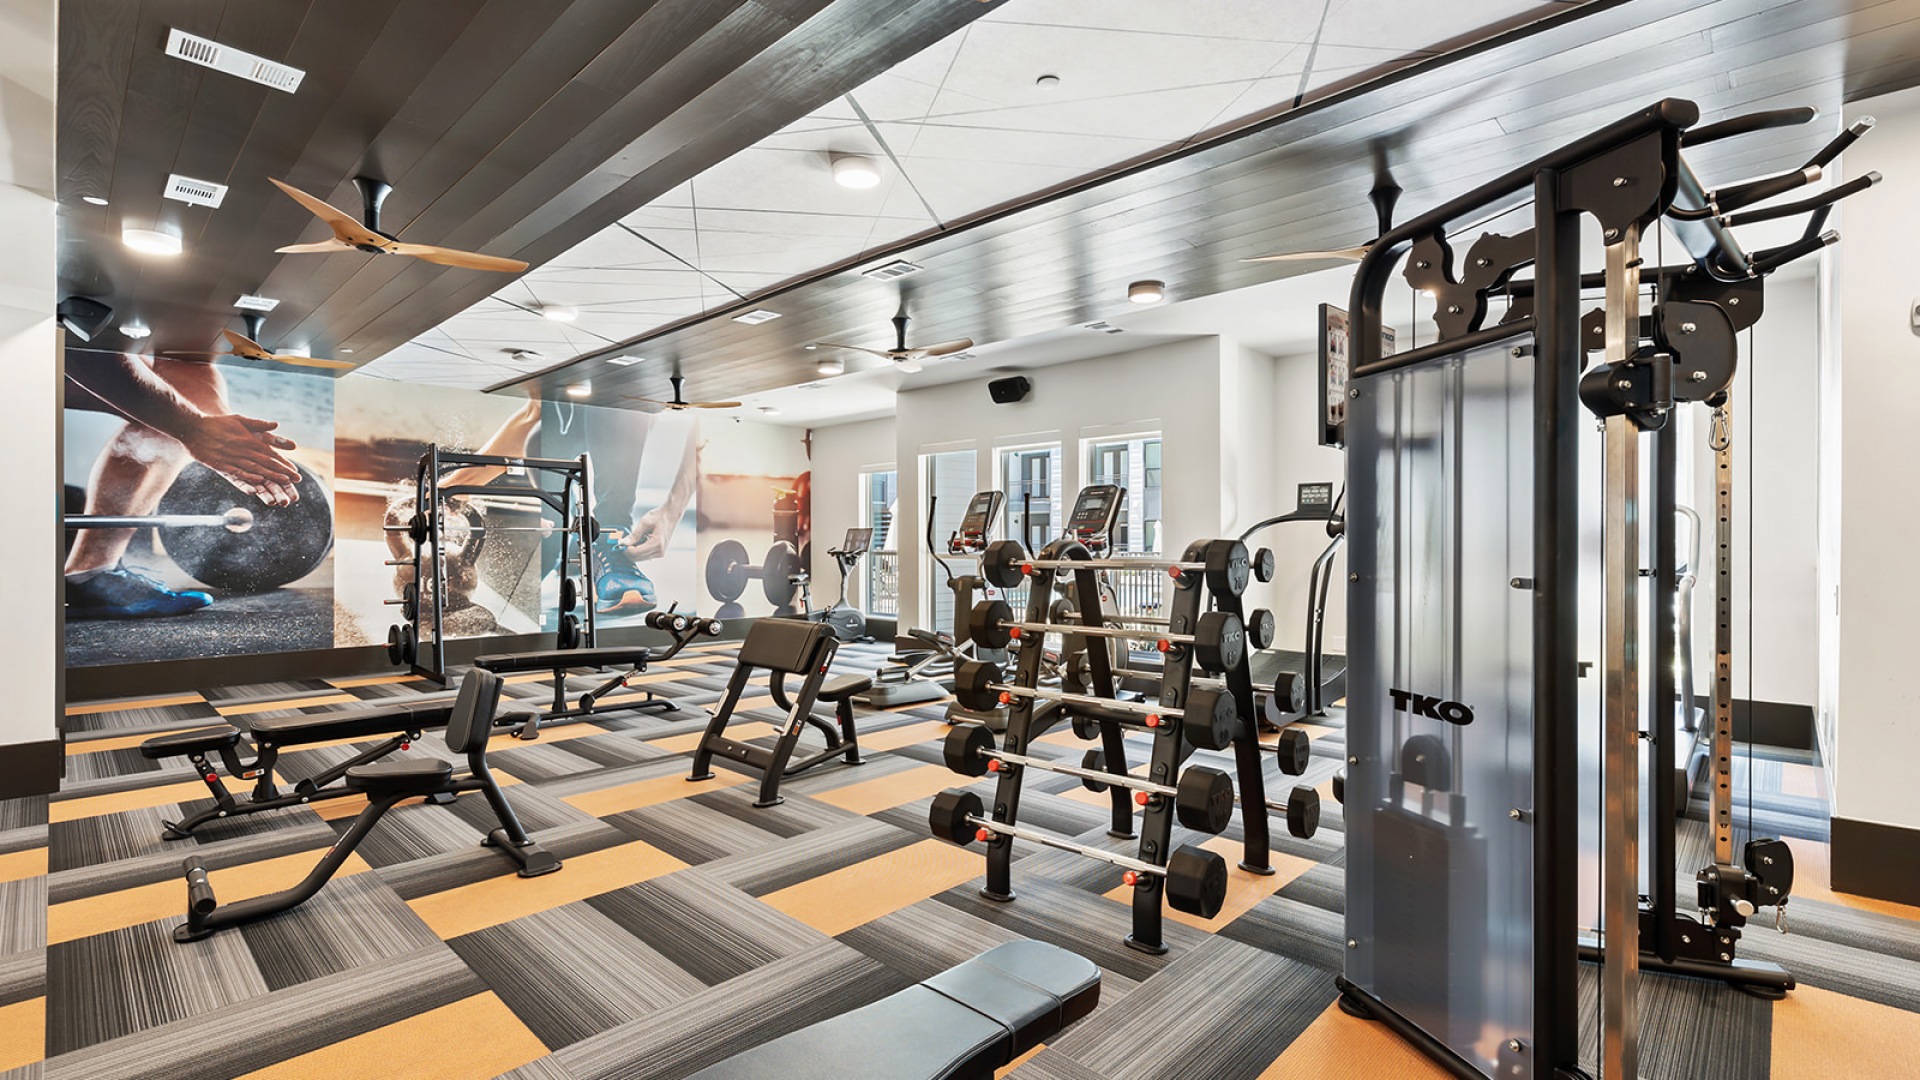 Cadmium fitness center at our apartments in Houston, featuring padded floors and exercise machines.